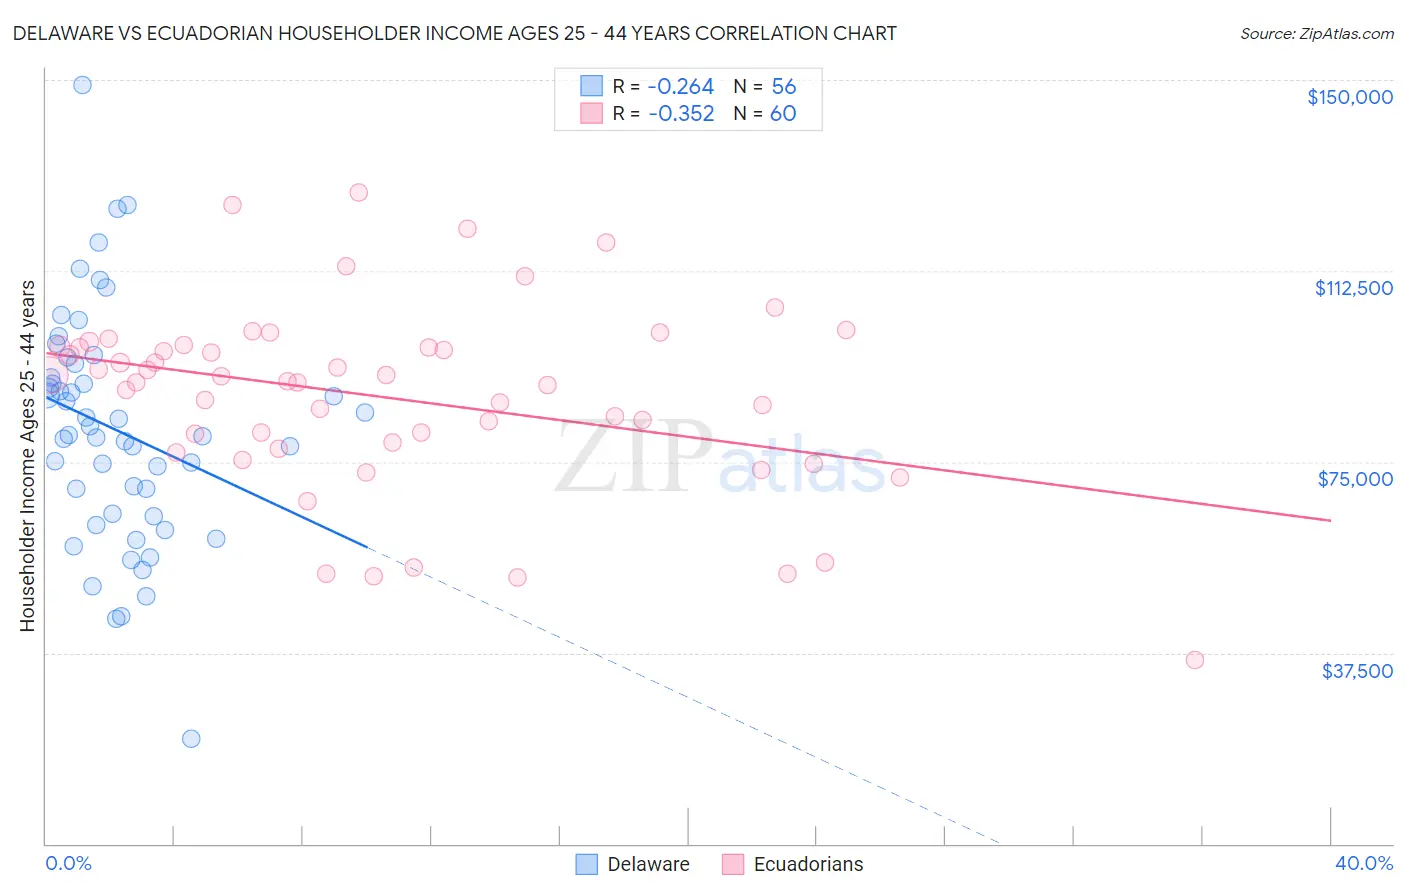 Delaware vs Ecuadorian Householder Income Ages 25 - 44 years